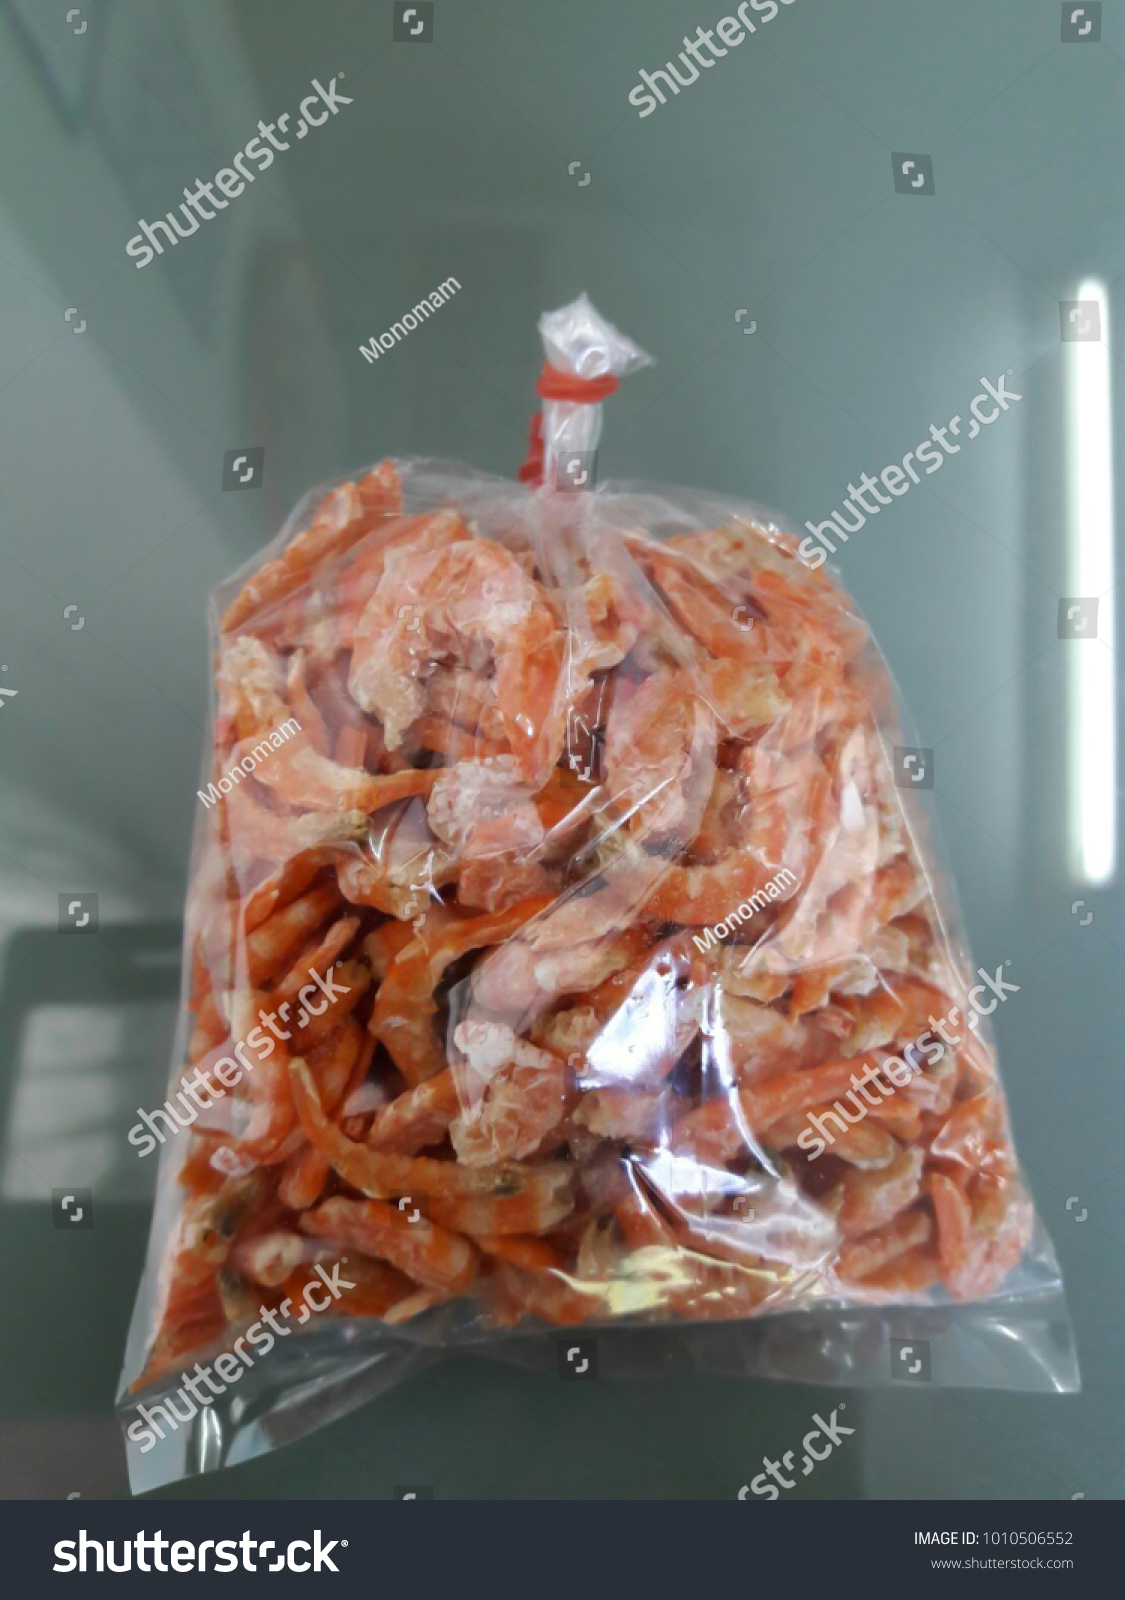 Download Dried Shrimp Small Plastic Bag Stock Photo Edit Now 1010506552 Yellowimages Mockups